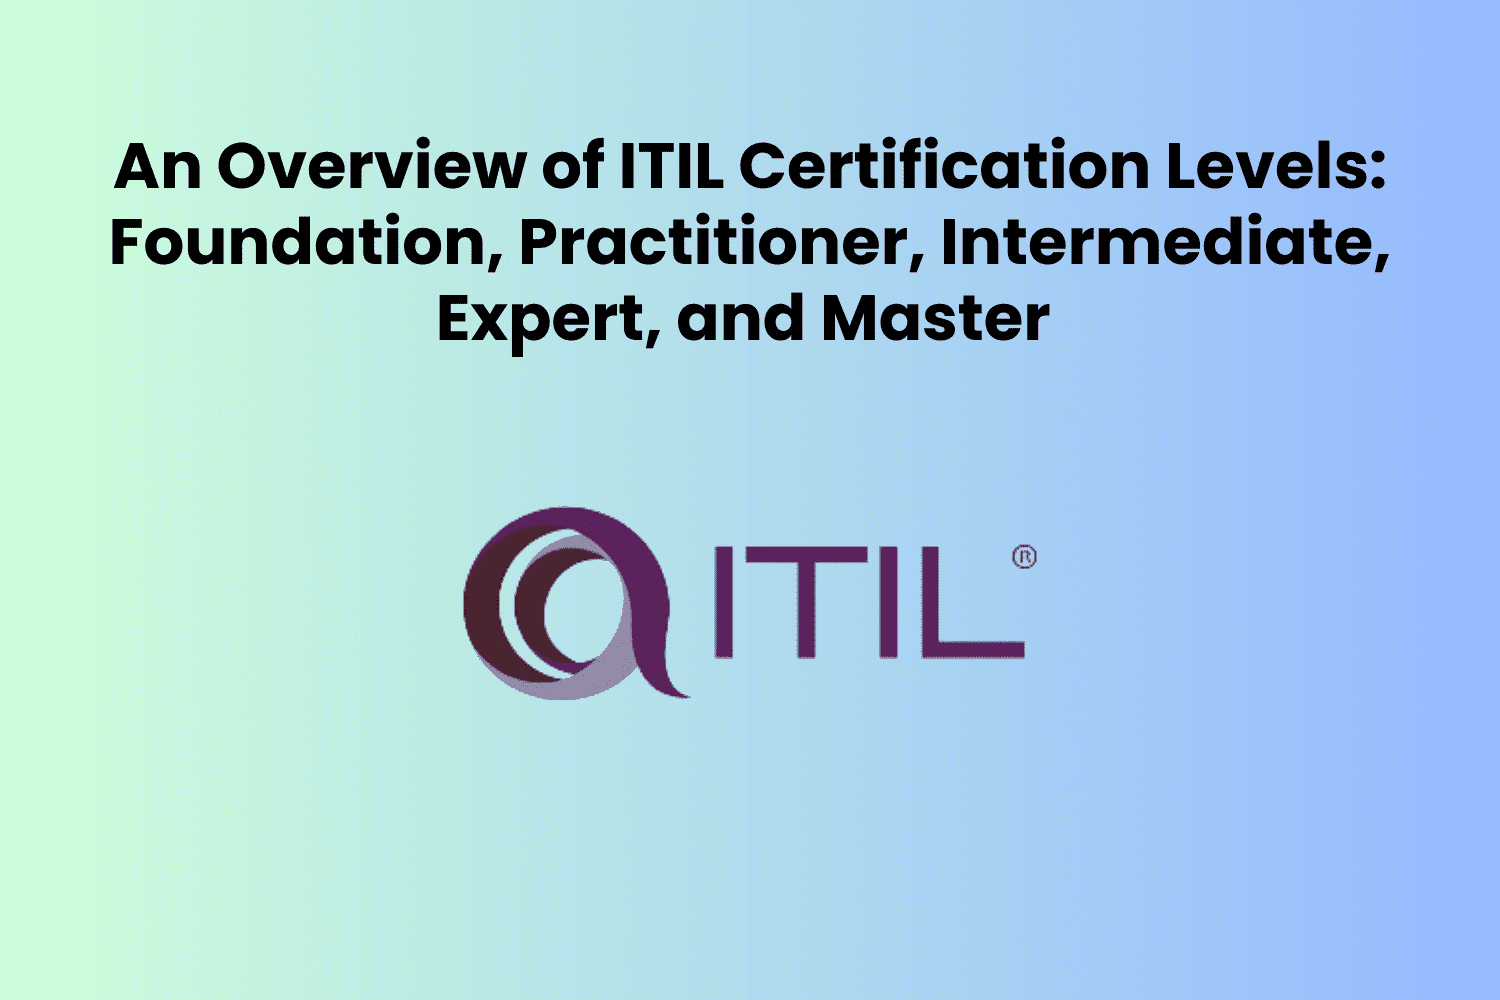 An Overview of ITIL Certification Levels: Foundation, Practitioner, Intermediate, Expert, and Master